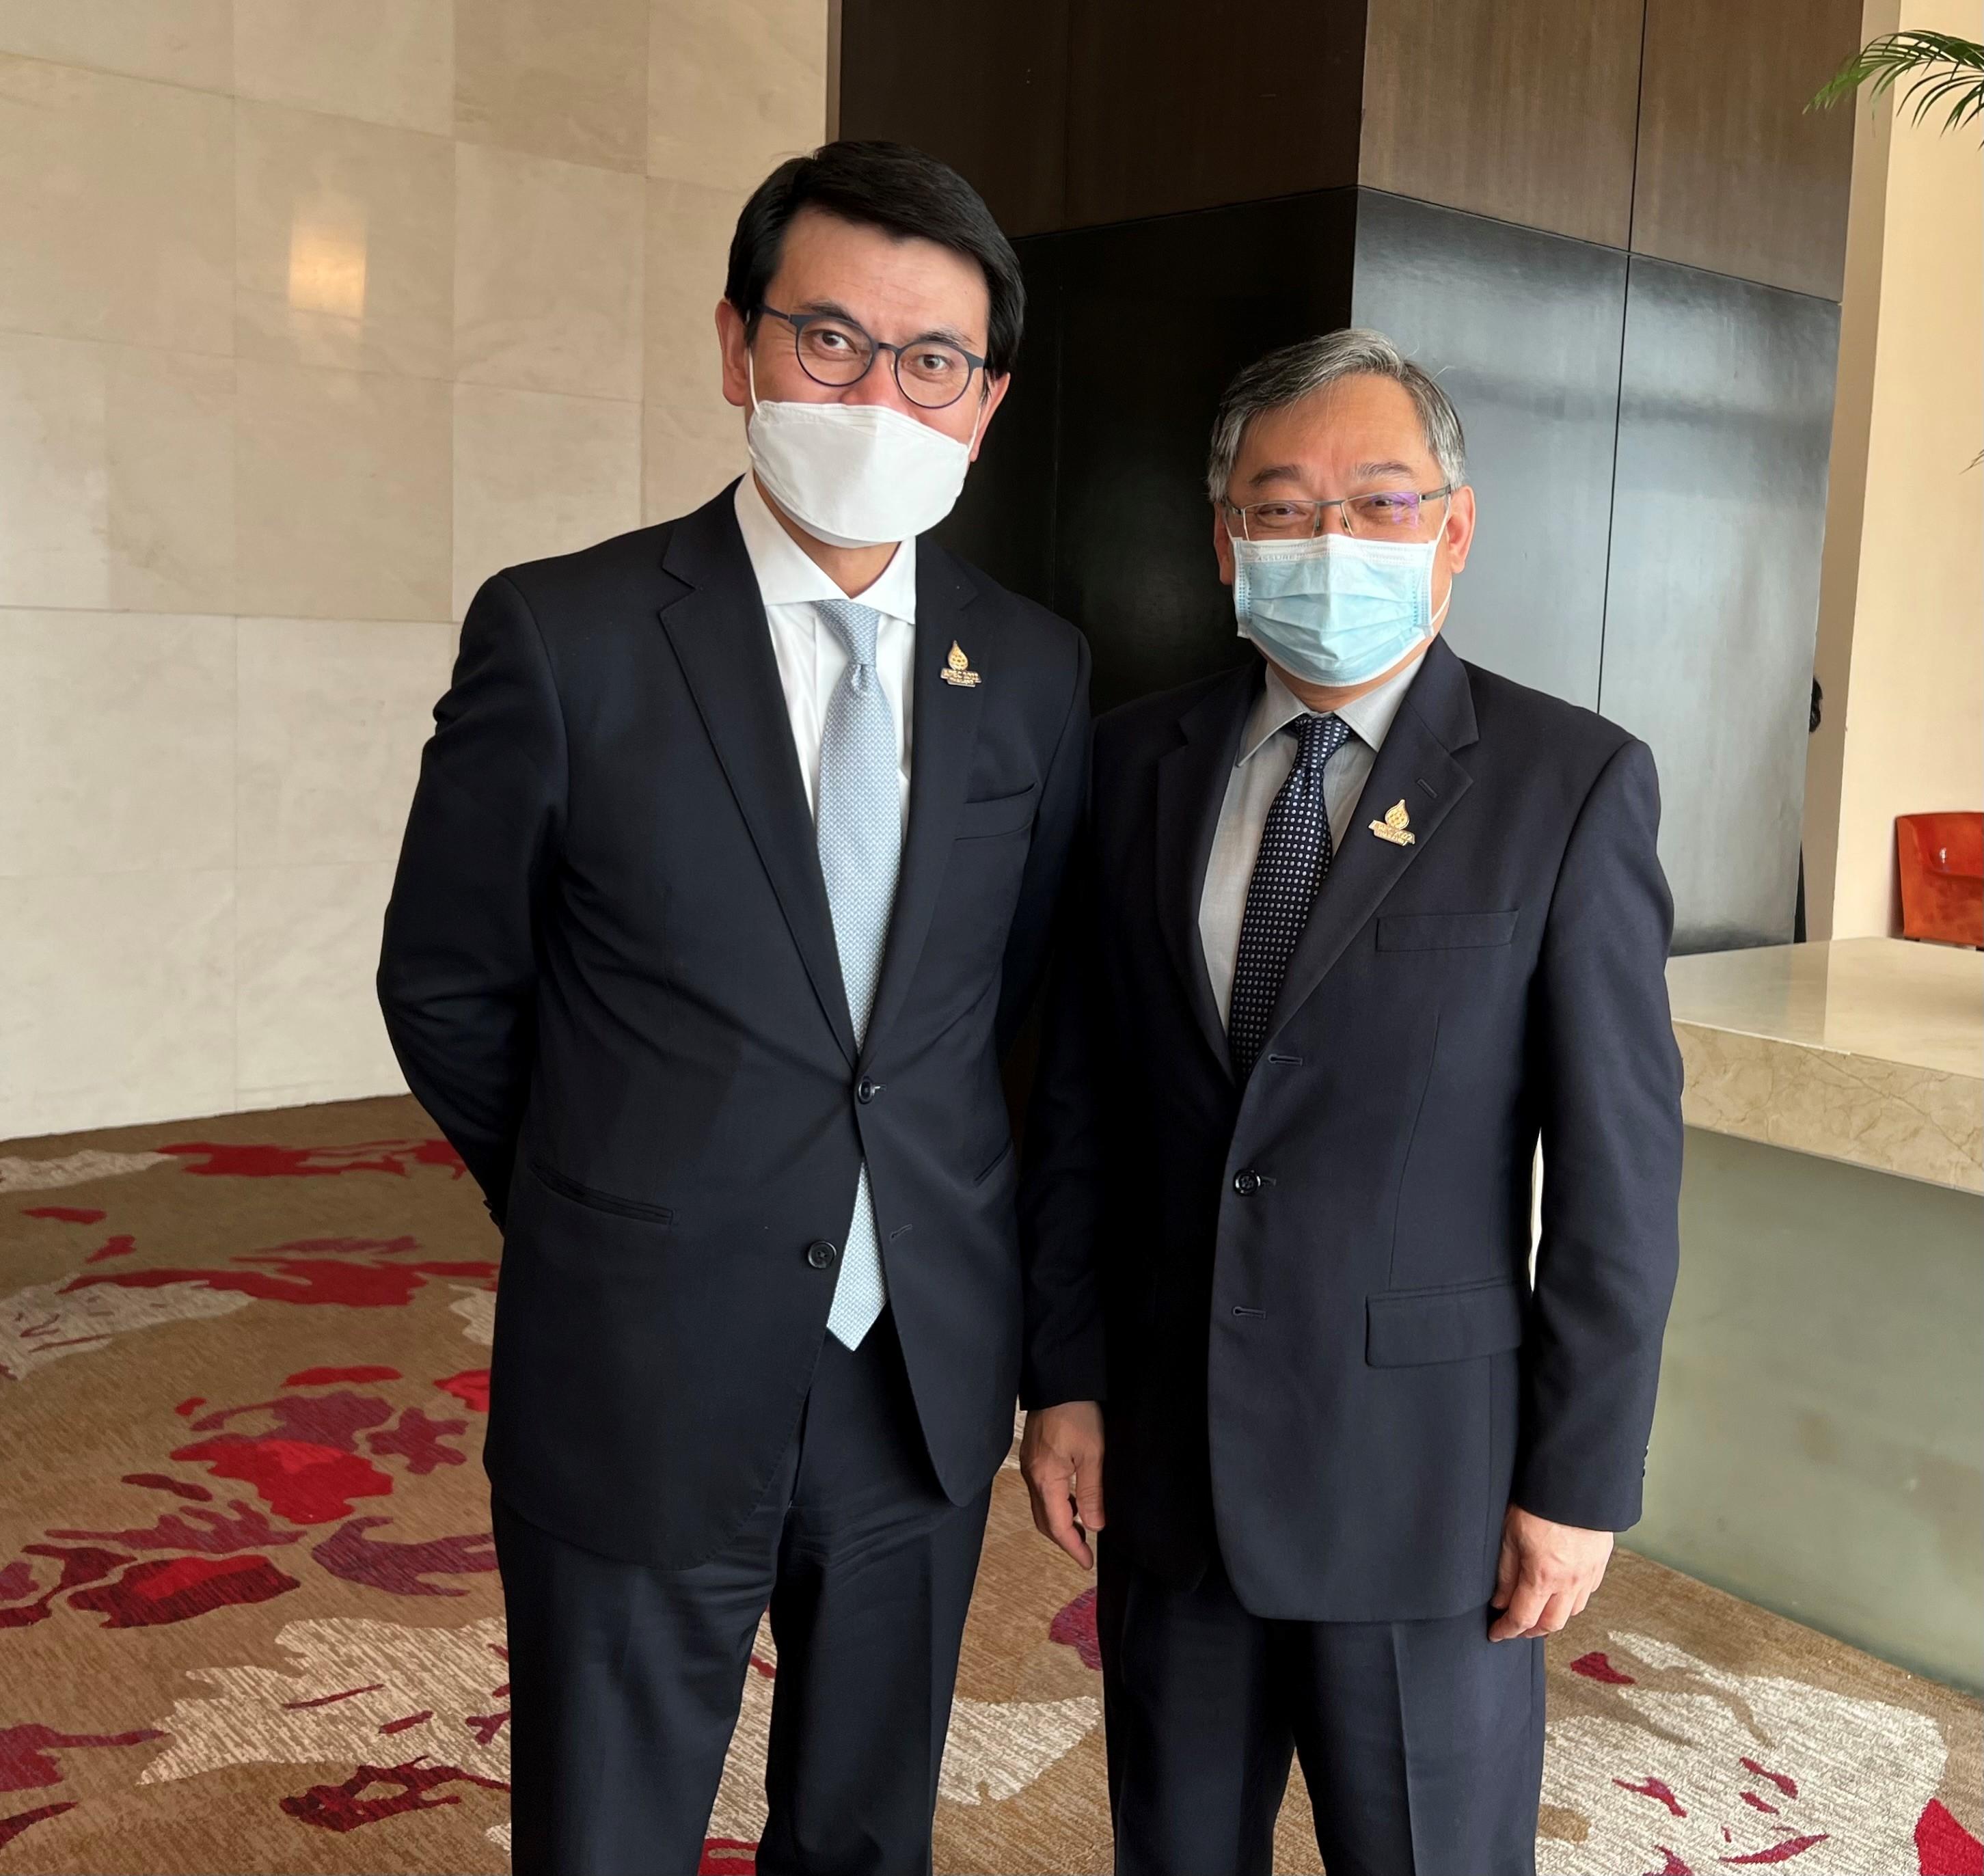 The Secretary for Commerce and Economic Development, Mr Edward Yau (left), met with the Minister for Trade and Industry of Singapore, Mr Gan Kim Yong, on the sidelines of the Asia-Pacific Economic Cooperation Ministers Responsible for Trade Meeting in Bangkok, Thailand, today (May 21).